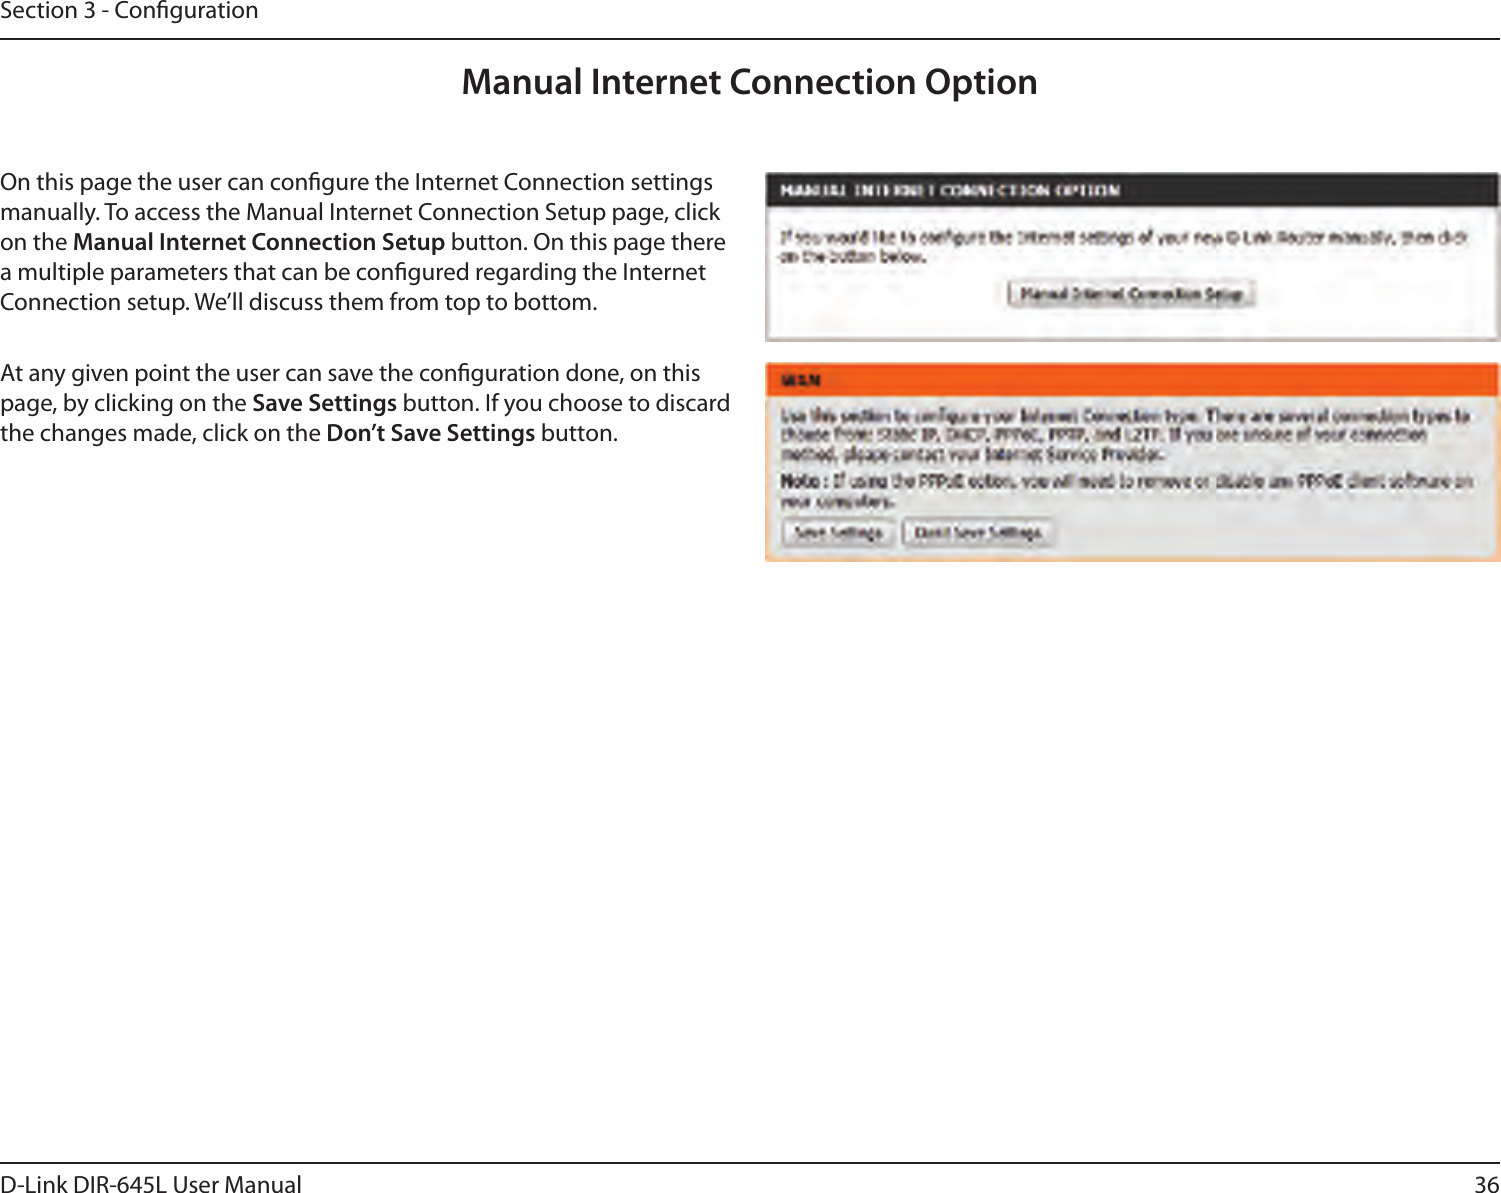 36D-Link DIR-645L User ManualSection 3 - CongurationManual Internet Connection OptionOn this page the user can congure the Internet Connection settings manually. To access the Manual Internet Connection Setup page, click on the Manual Internet Connection Setup button. On this page there a multiple parameters that can be congured regarding the Internet Connection setup. We’ll discuss them from top to bottom.At any given point the user can save the conguration done, on this page, by clicking on the Save Settings button. If you choose to discard the changes made, click on the Don’t Save Settings button.